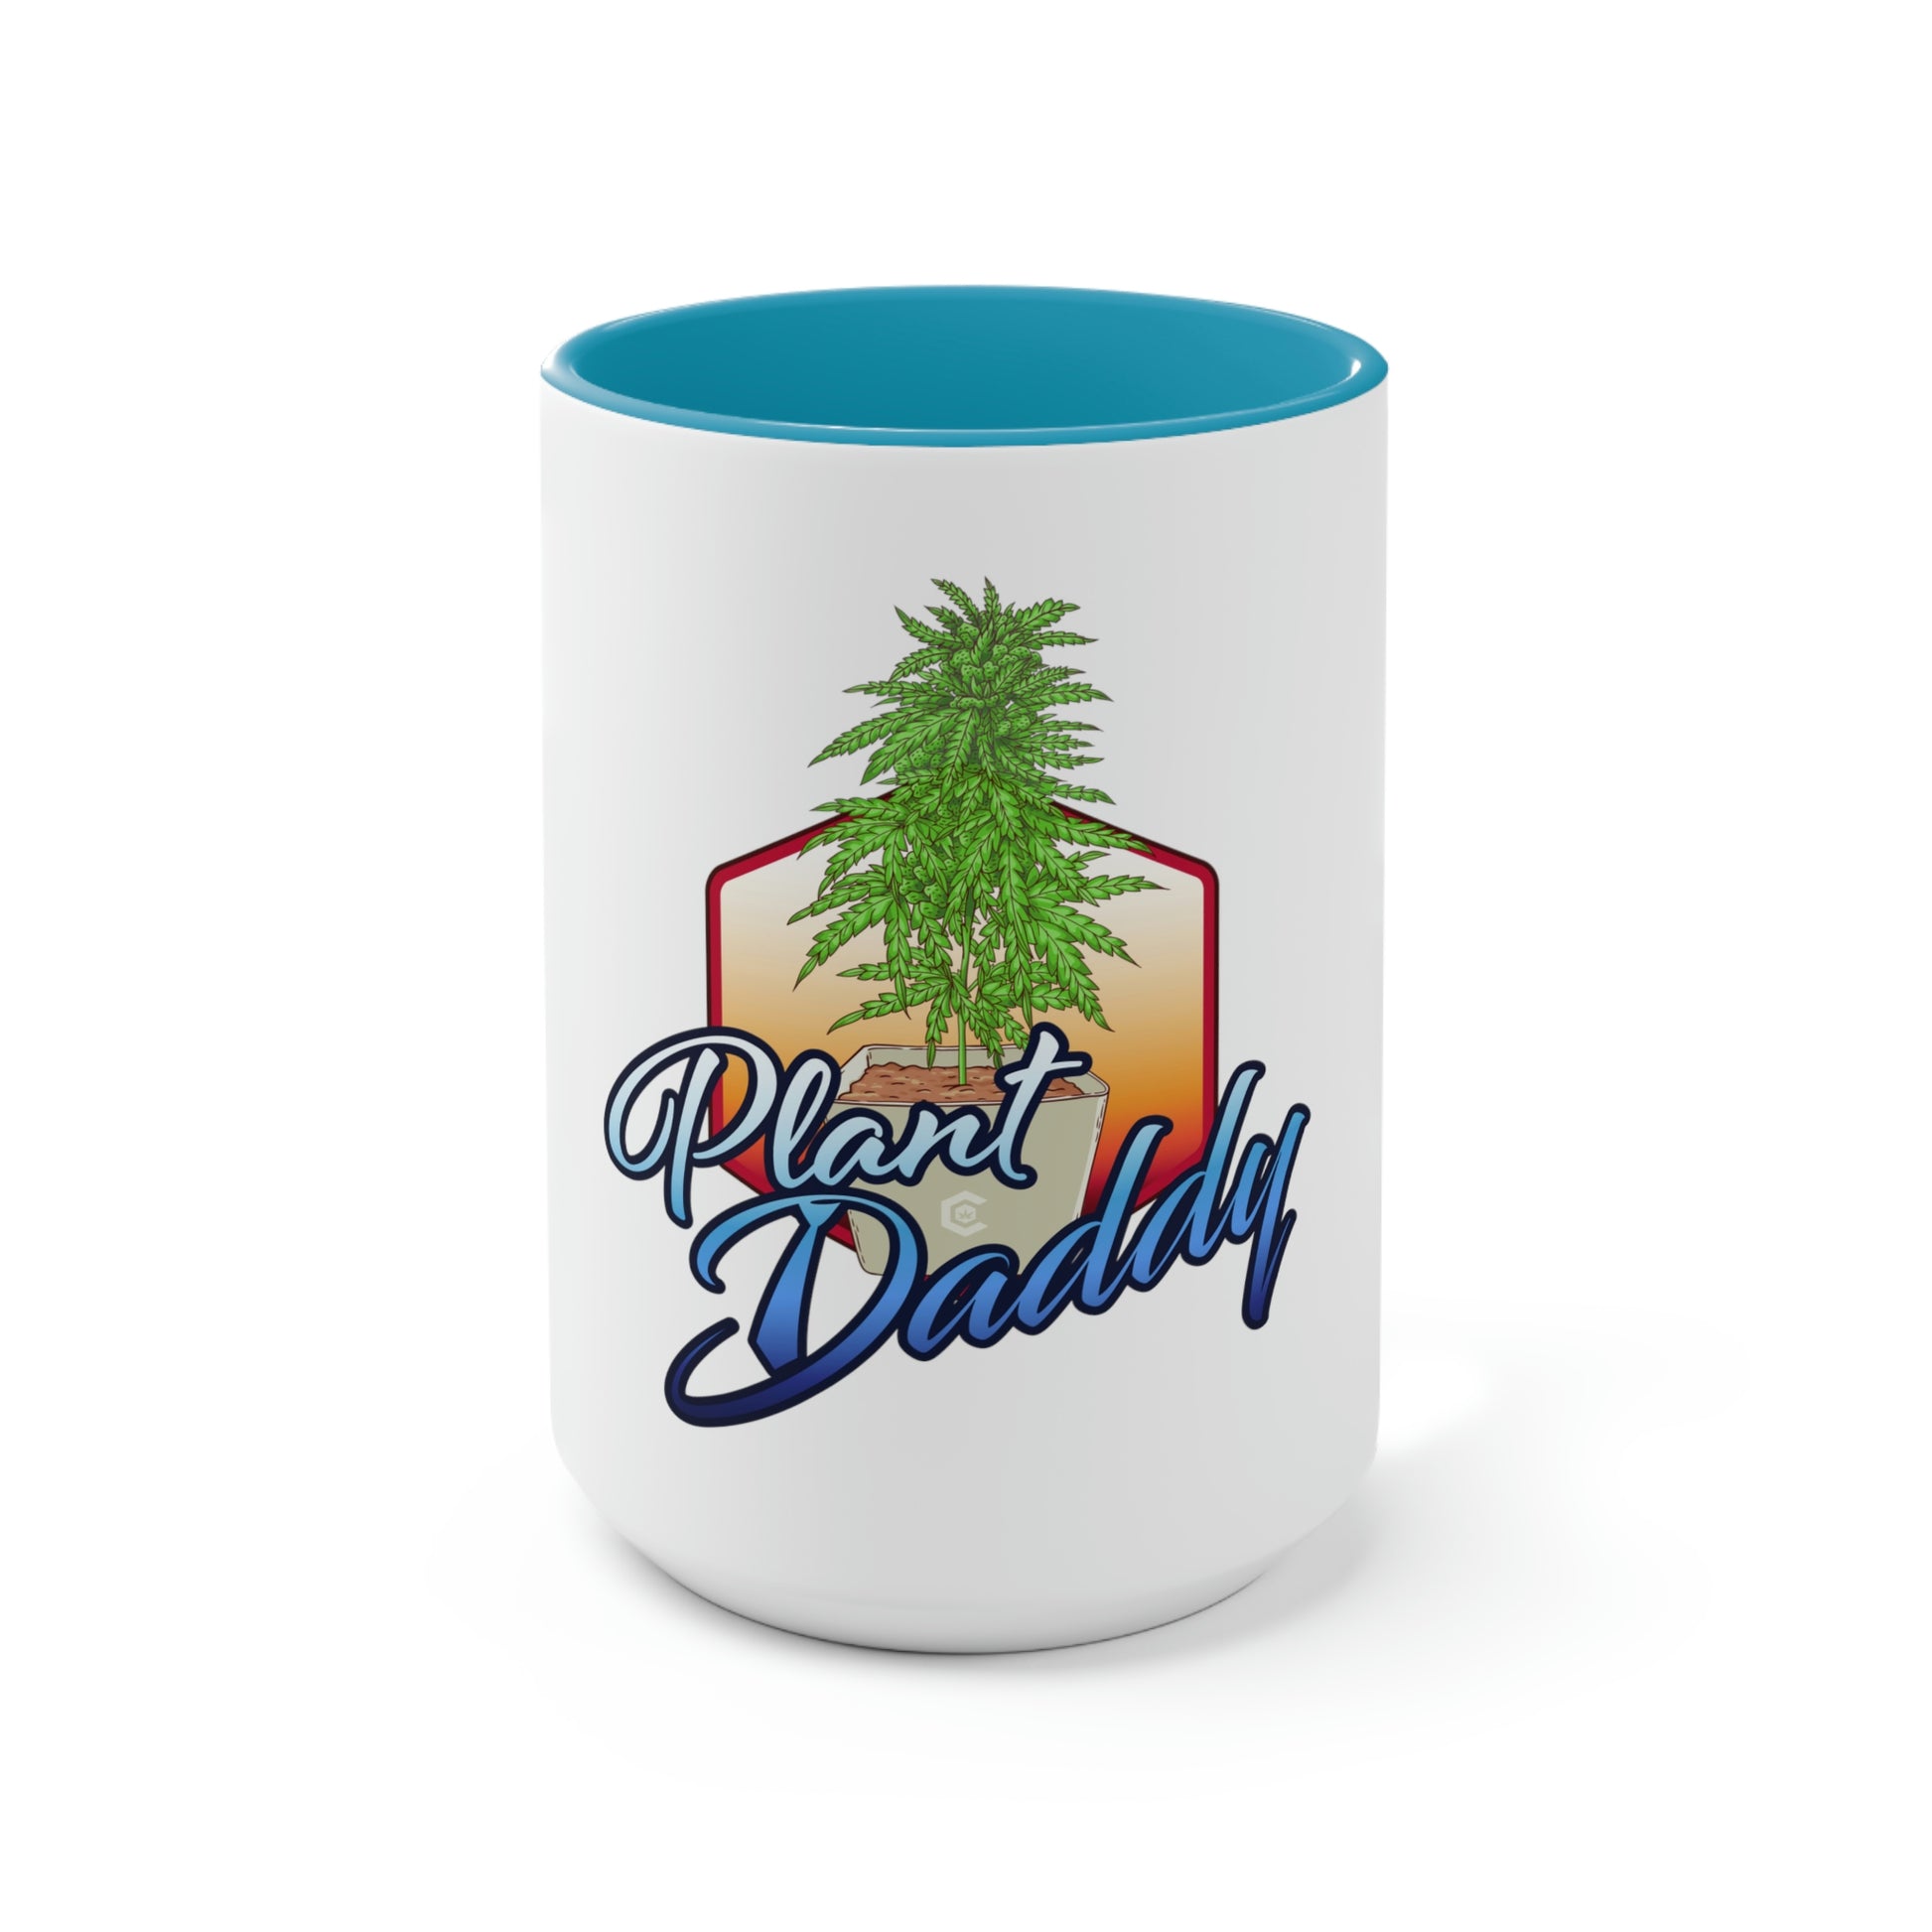 a Cannabis Plant Daddy Coffee Mug with the word 'roost daddy' on it.